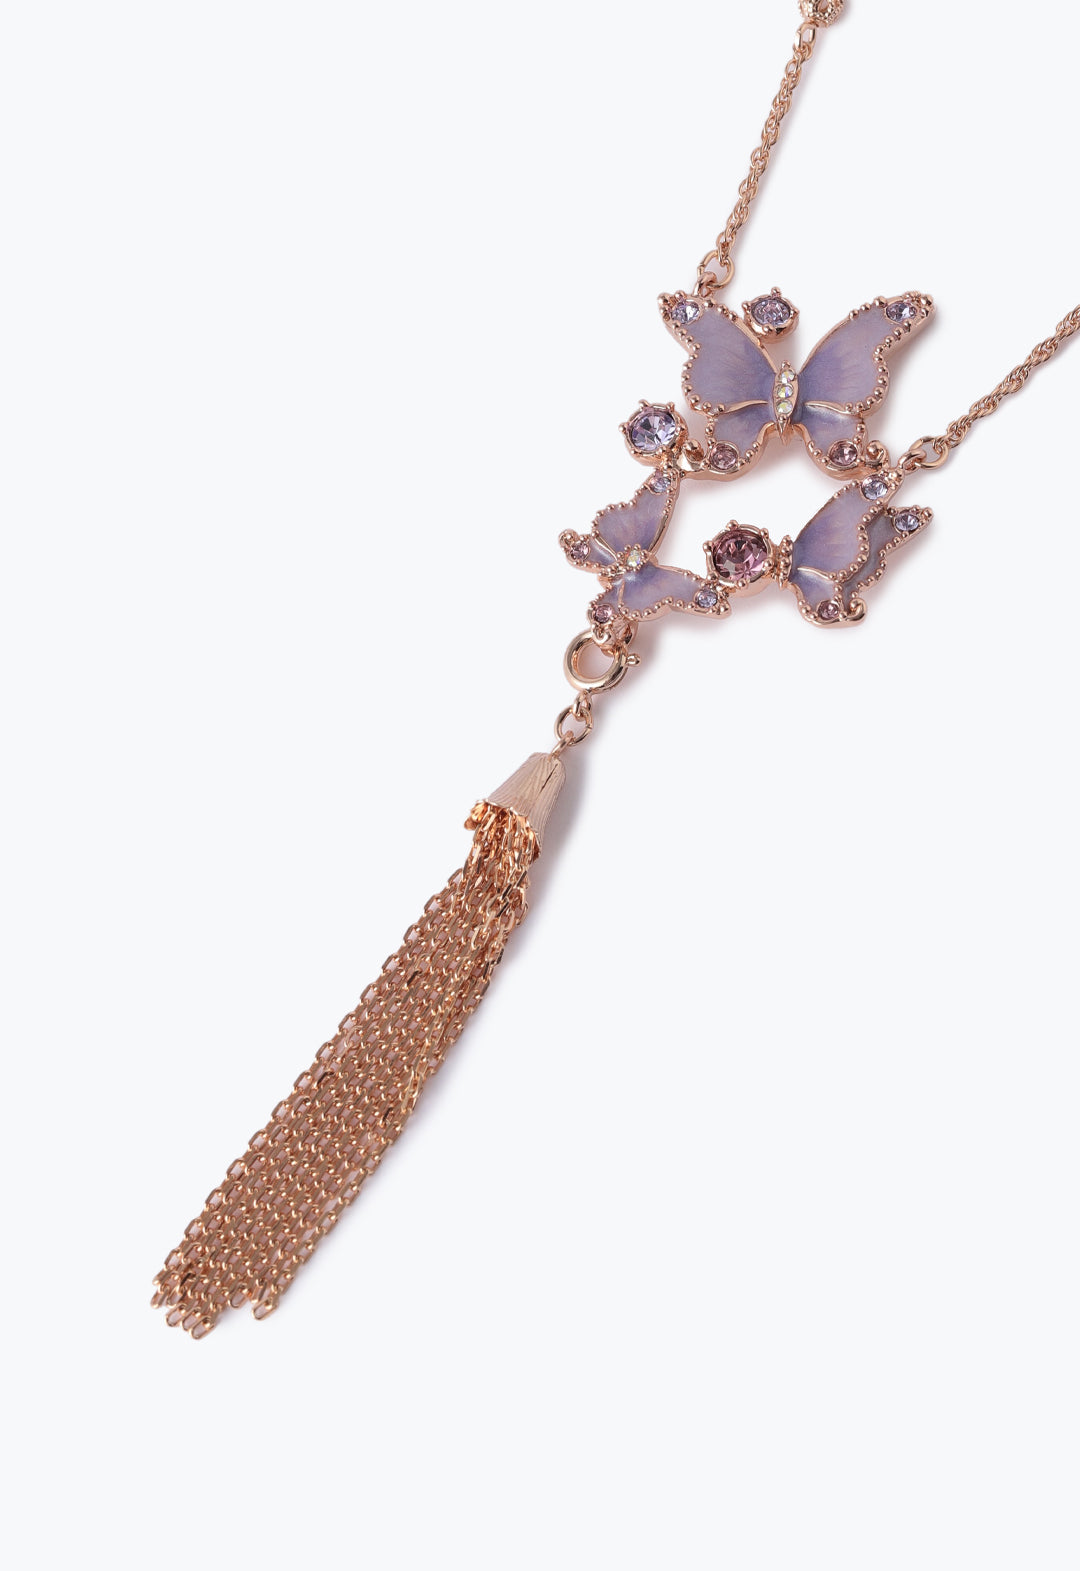 Butterfly Trio Statement Necklace Purple, under the butterflies, a tieback like with small chains can be dethatch